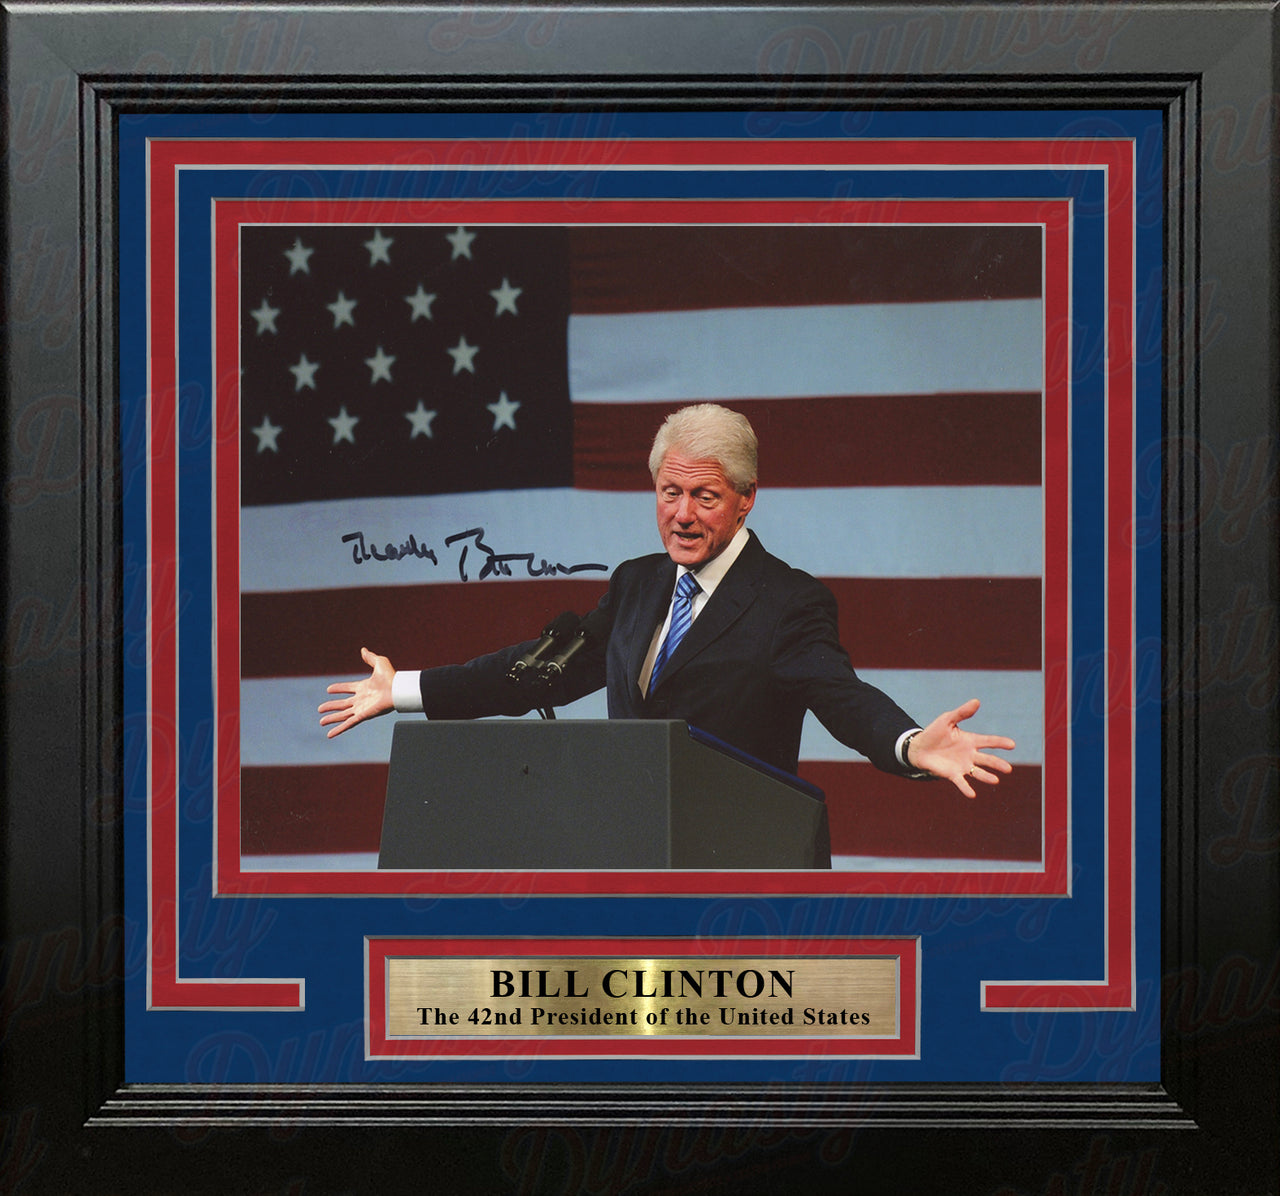 Bill Clinton 42nd President of the United States Autographed 8" x 10" Framed Photo - Dynasty Sports & Framing 